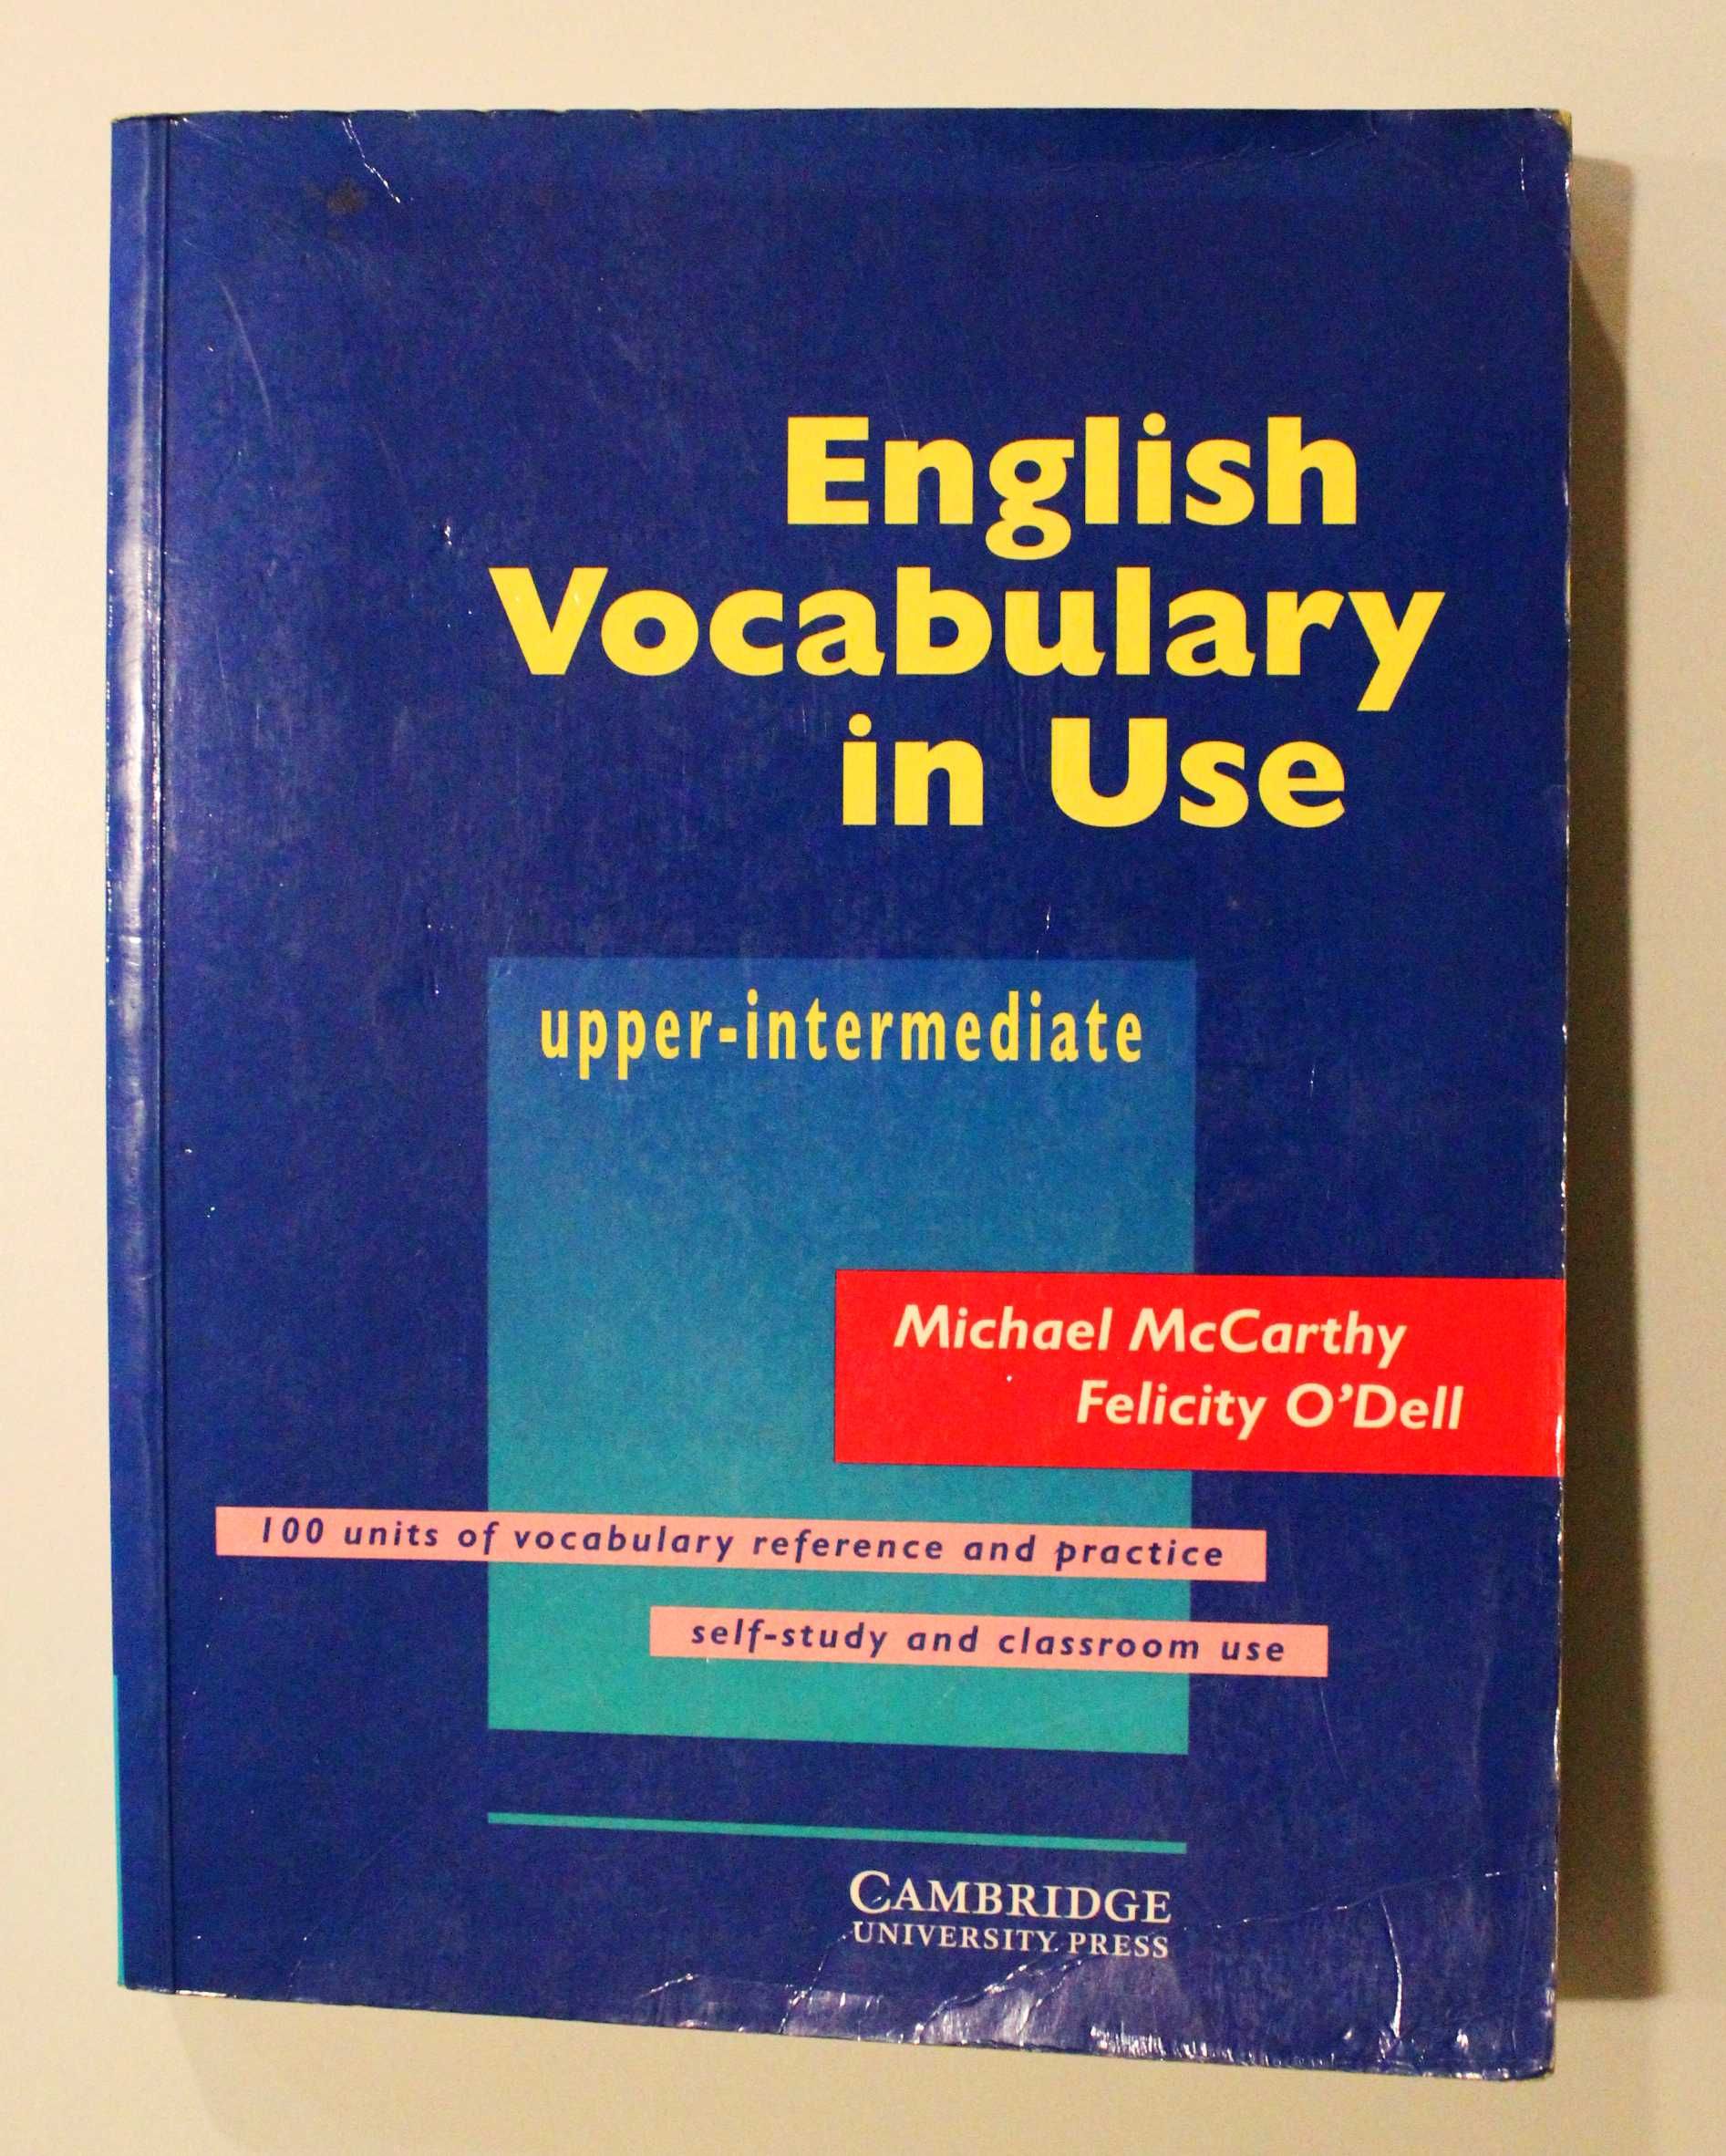 Vocabulary in use